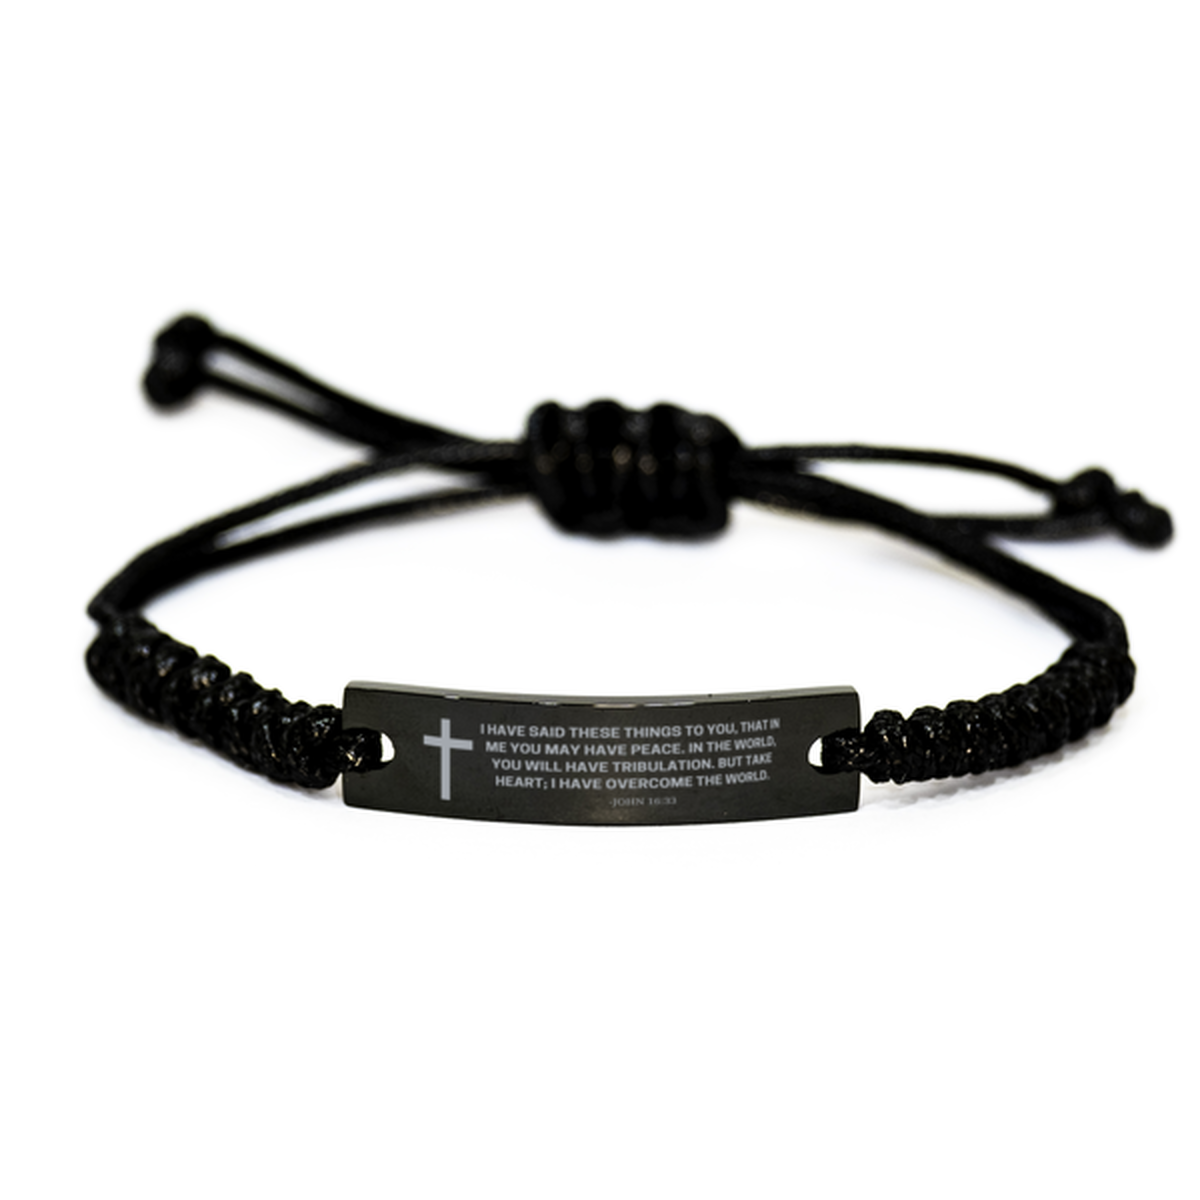 Baptism Gifts For Teenage Boys Girls, Christian Bible Verse Black Rope Bracelet, I have said these things, Catholic Confirmation Gifts for Son, Godson, Grandson, Nephew